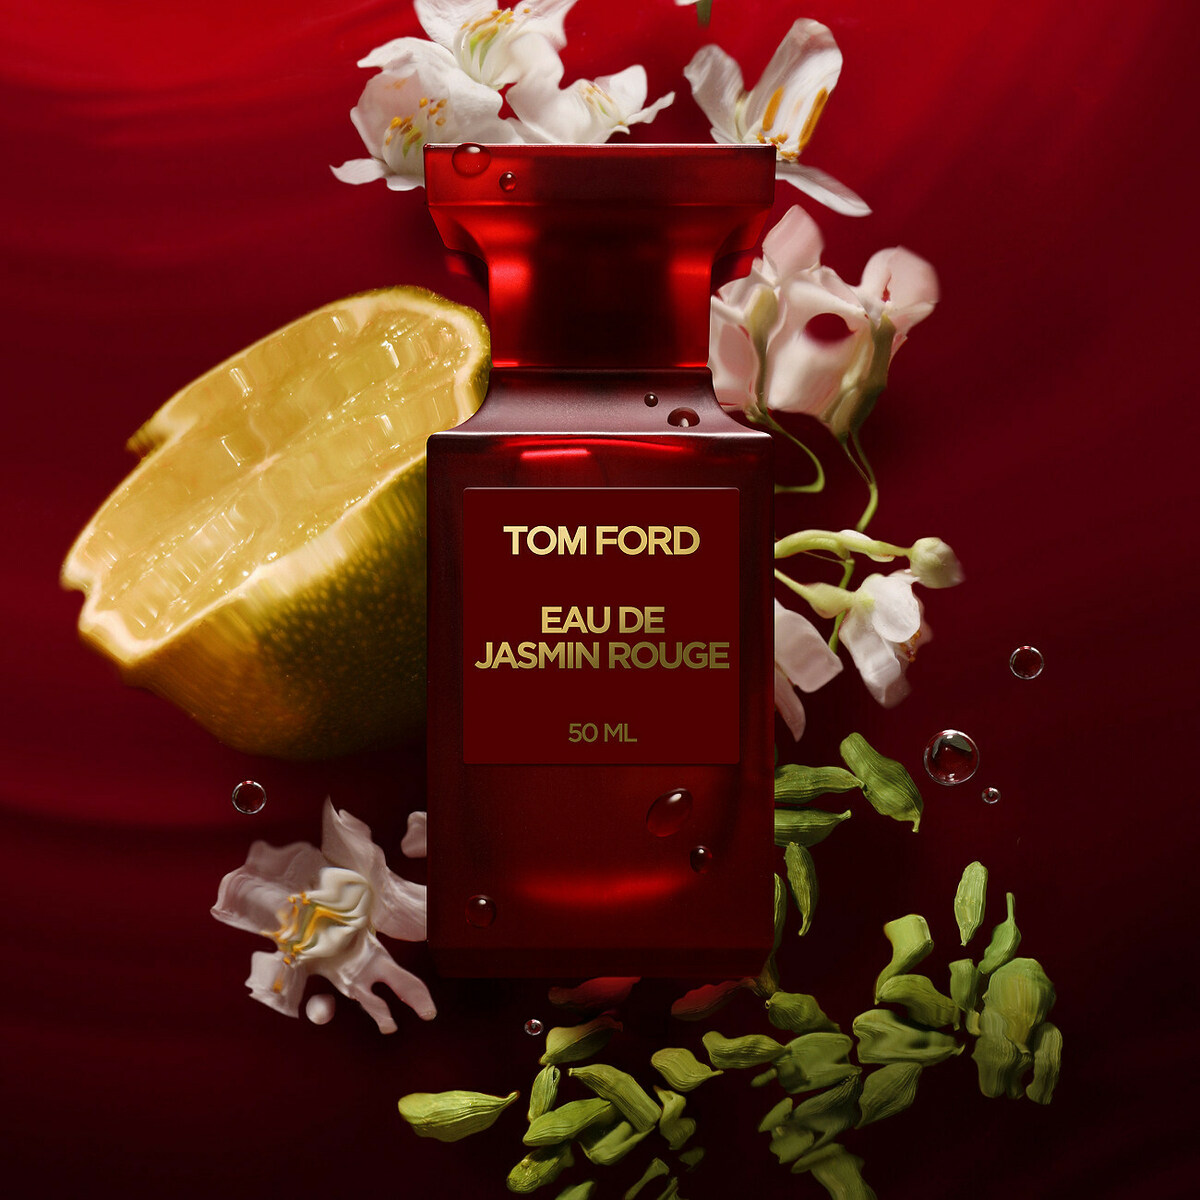 Eau de Jasmin Rouge by Tom Ford » Reviews & Perfume Facts